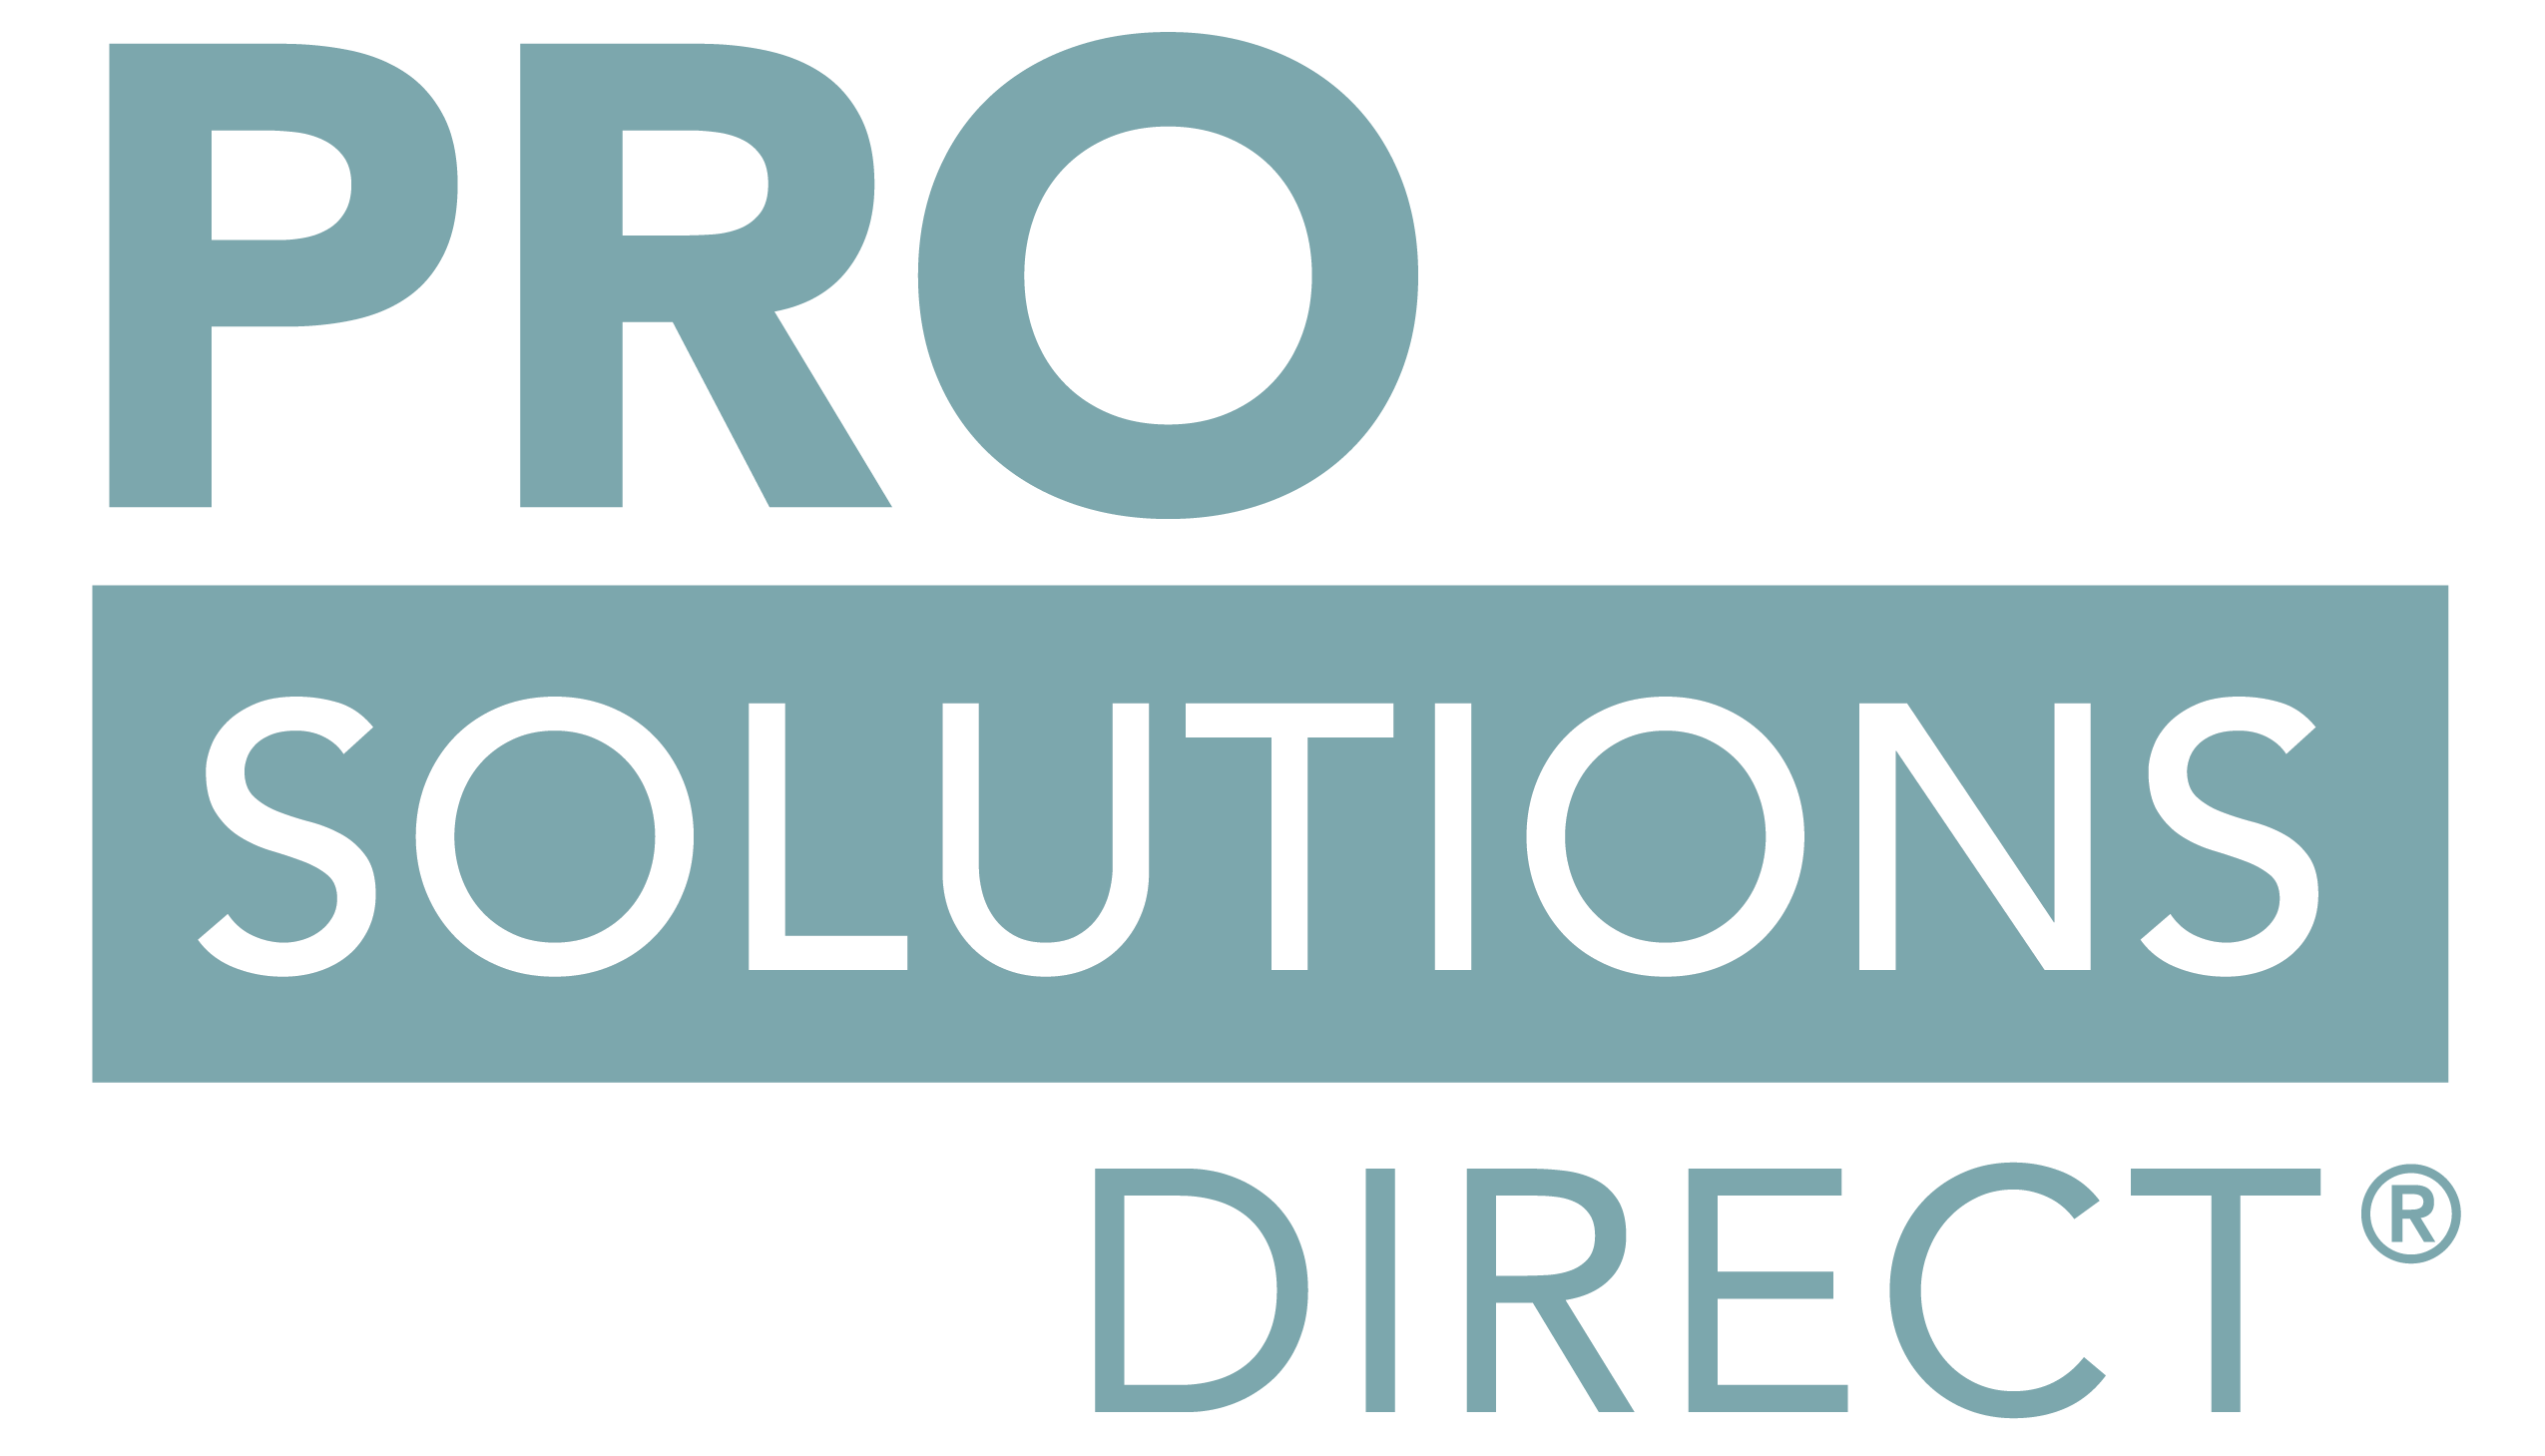 Pro Solutions Direct Logo